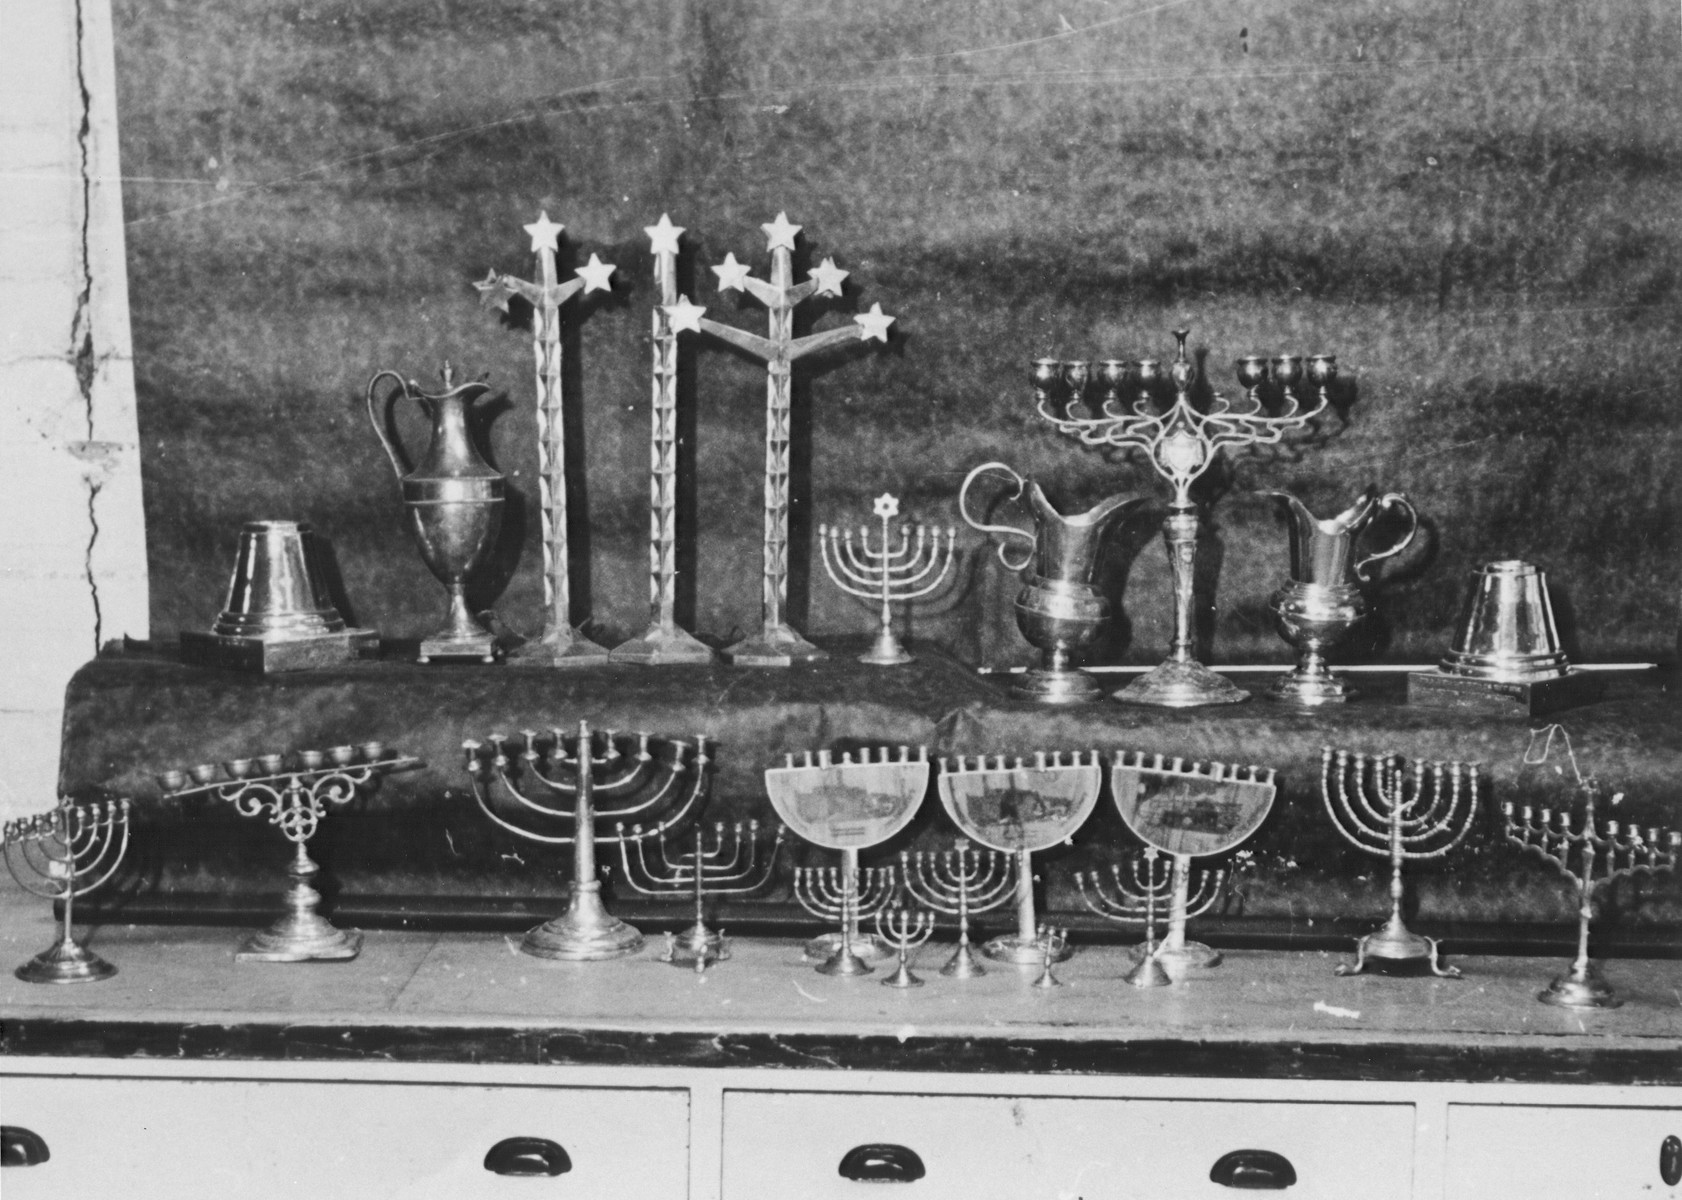 Display of silver Hanukkah menorahs and other ritual articles confiscated by the Nazis.